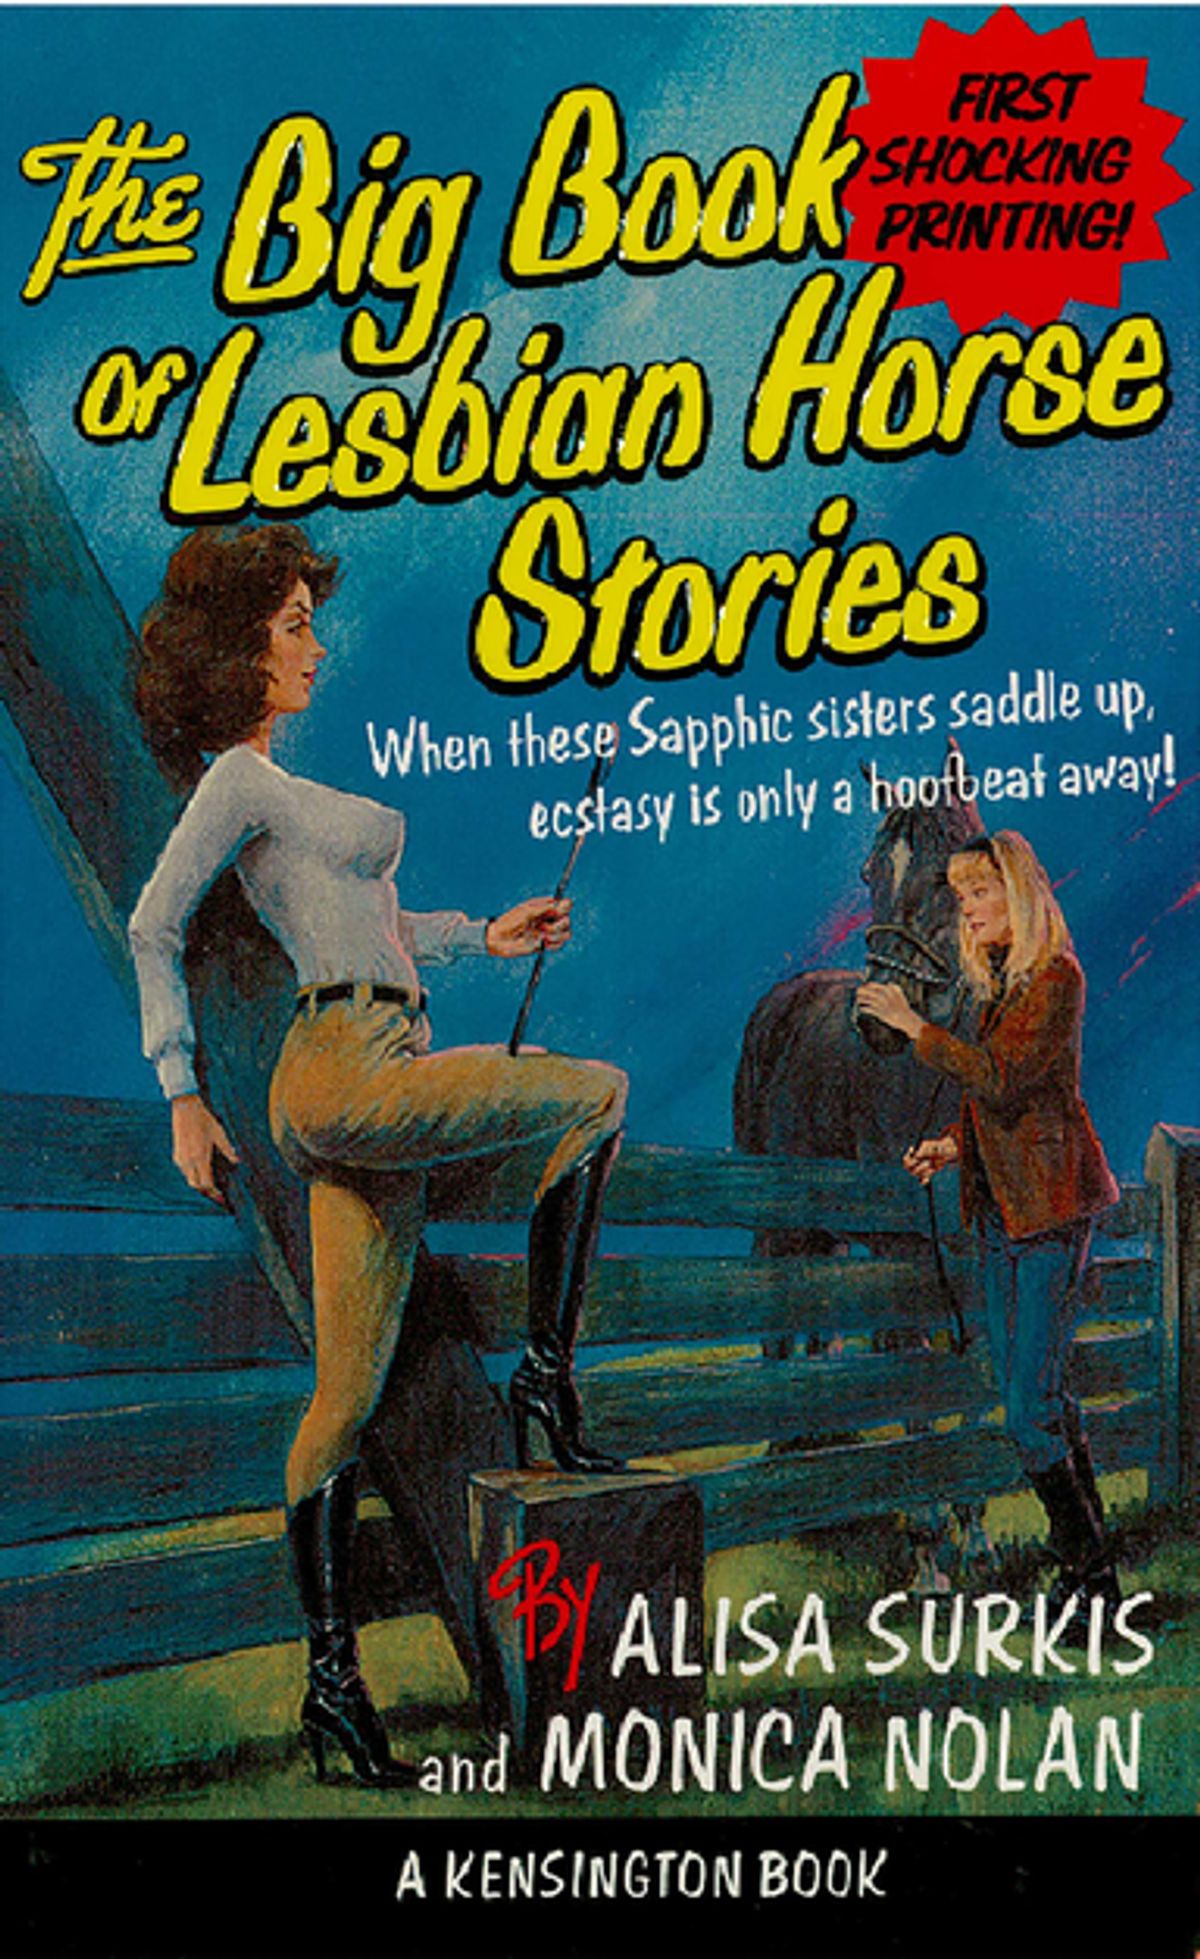 'The Big Book of Lesbian Horse Stories' by Alisa Surkis